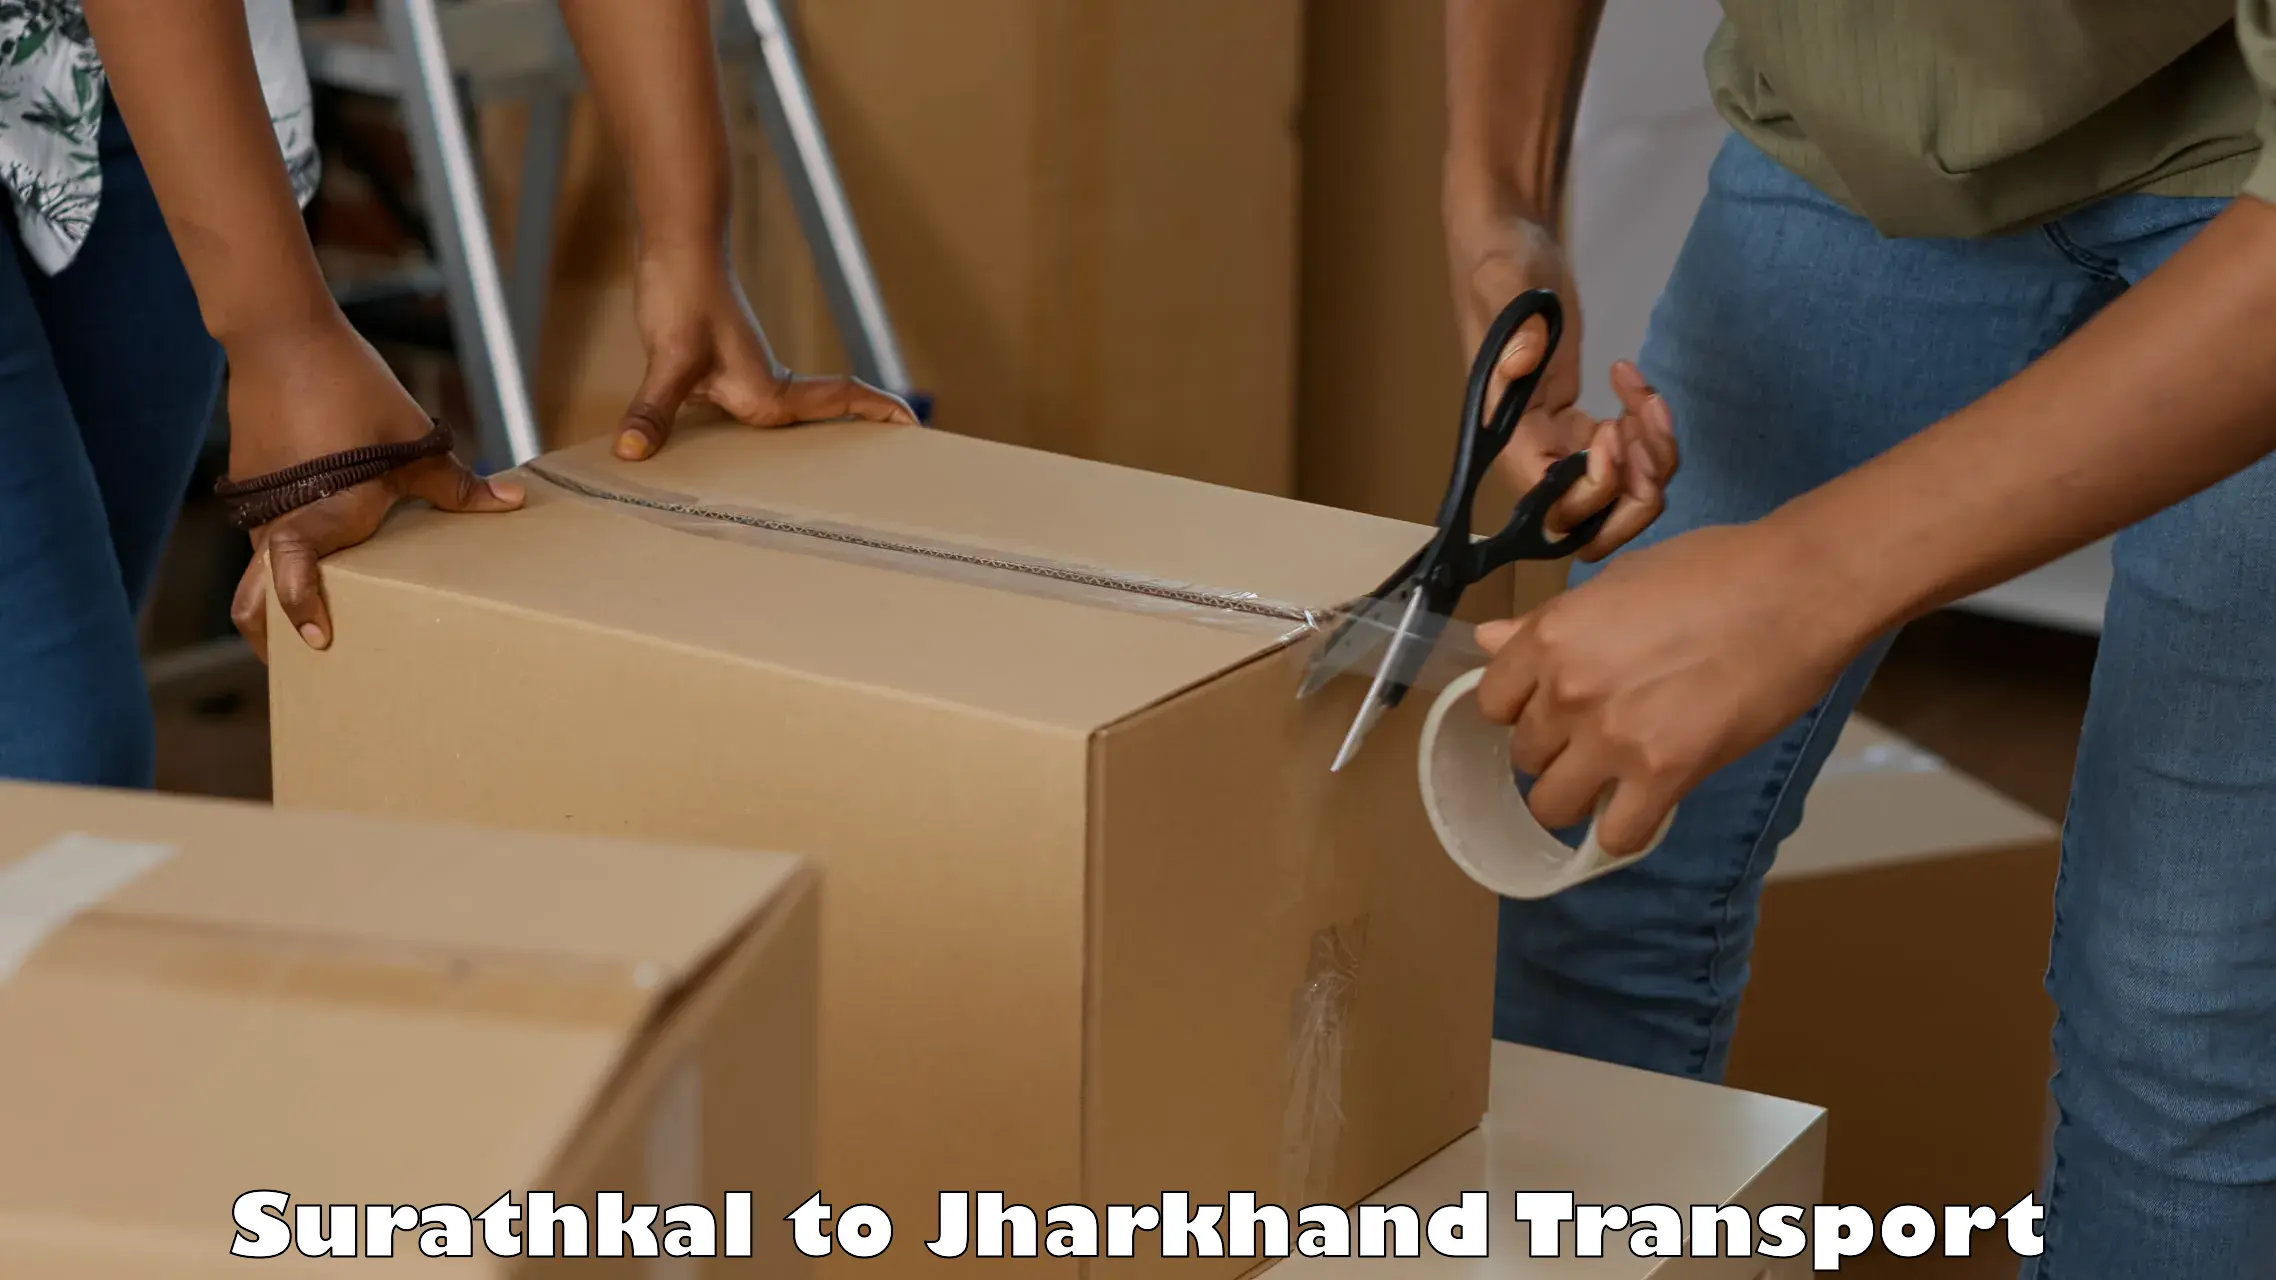 Truck transport companies in India Surathkal to IIT Dhanbad